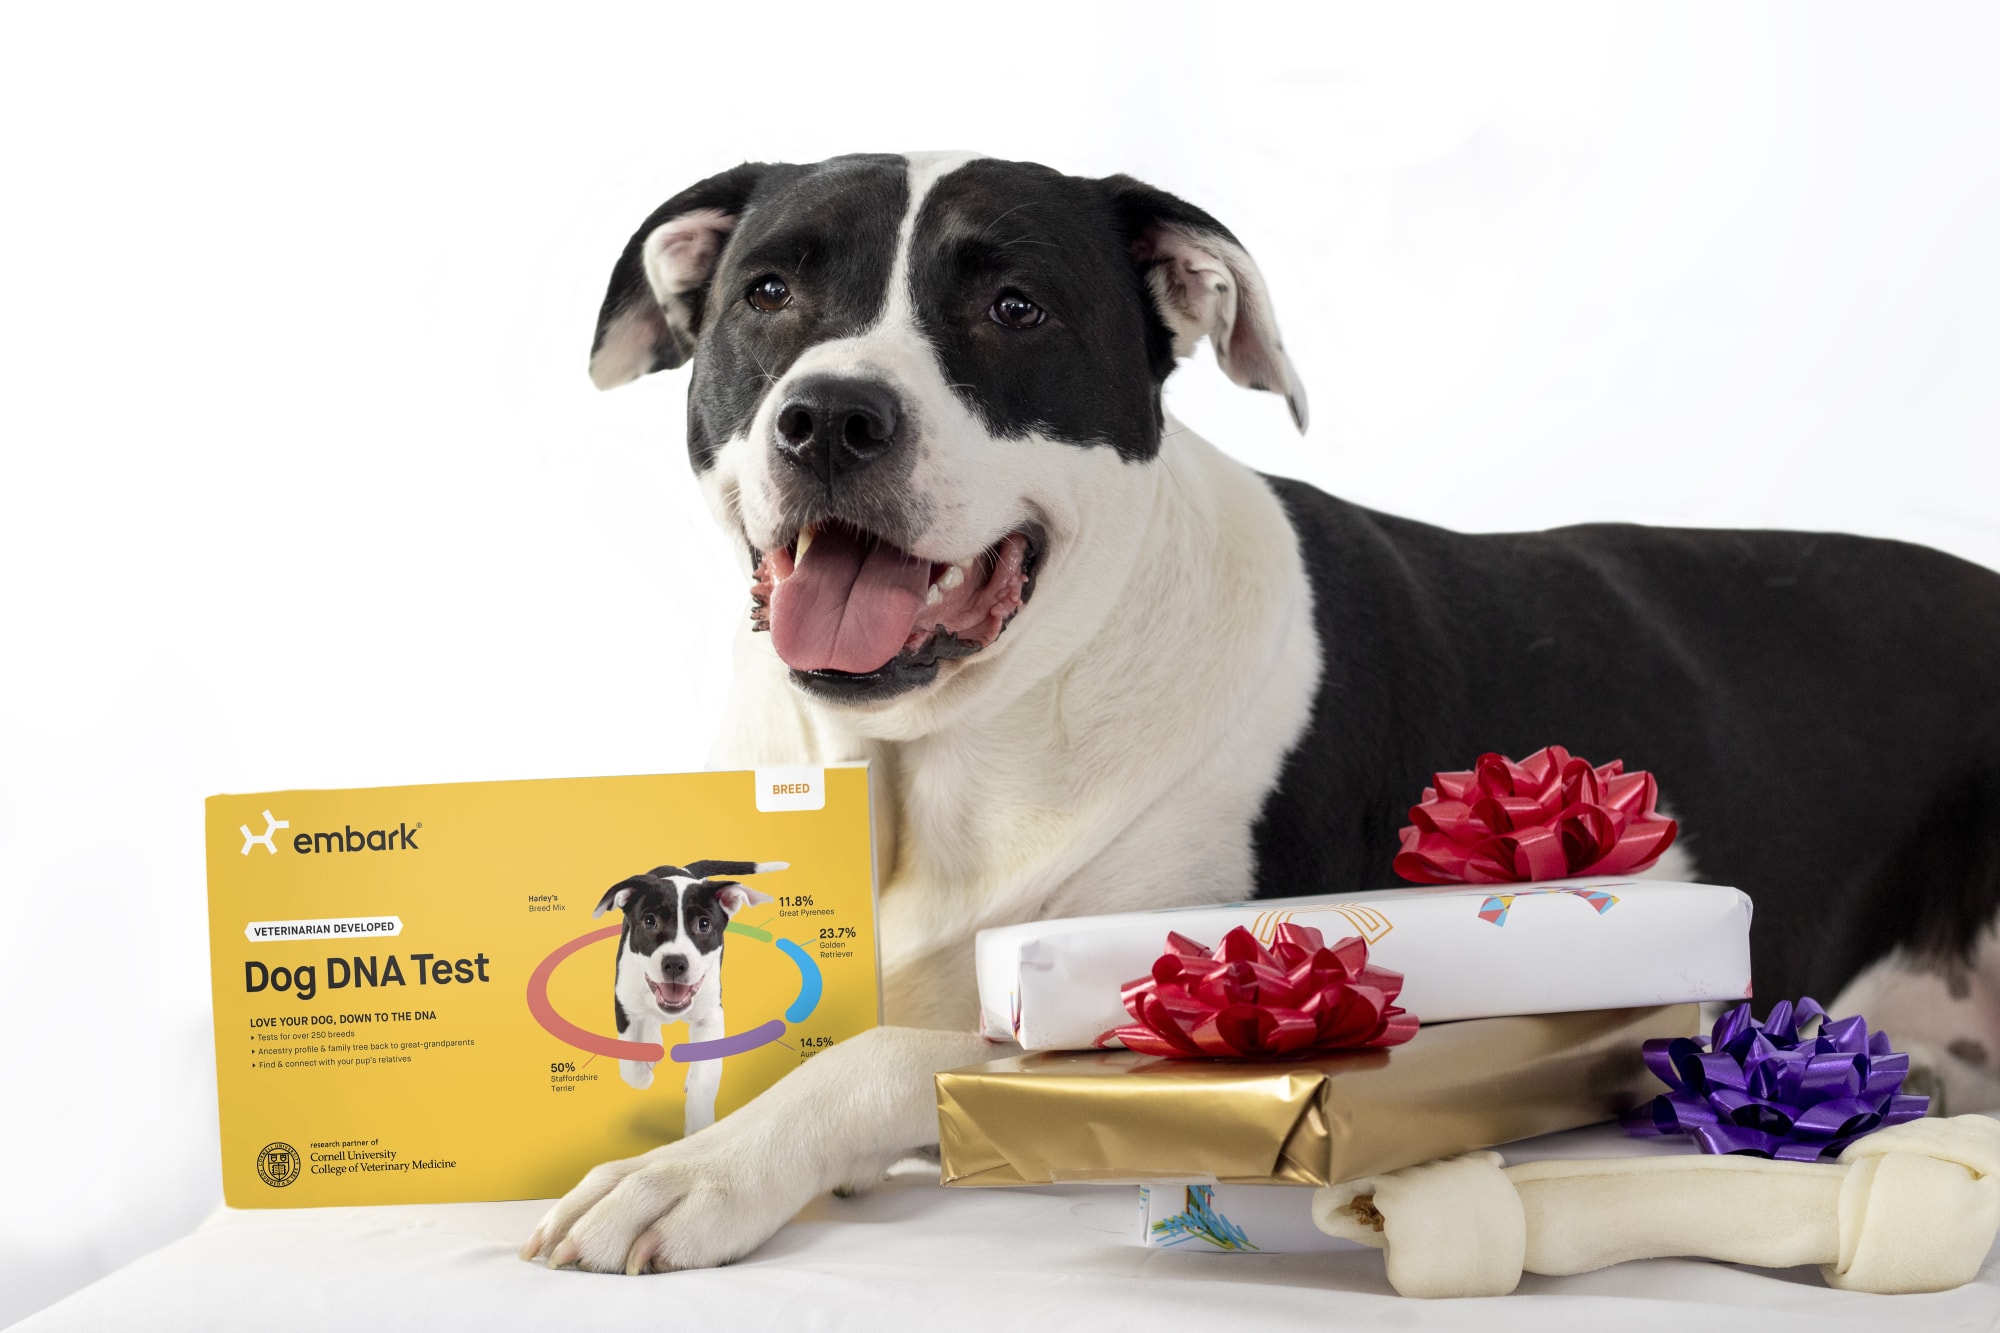 Embark dog DNA kits tell us everything we need to know about our pups